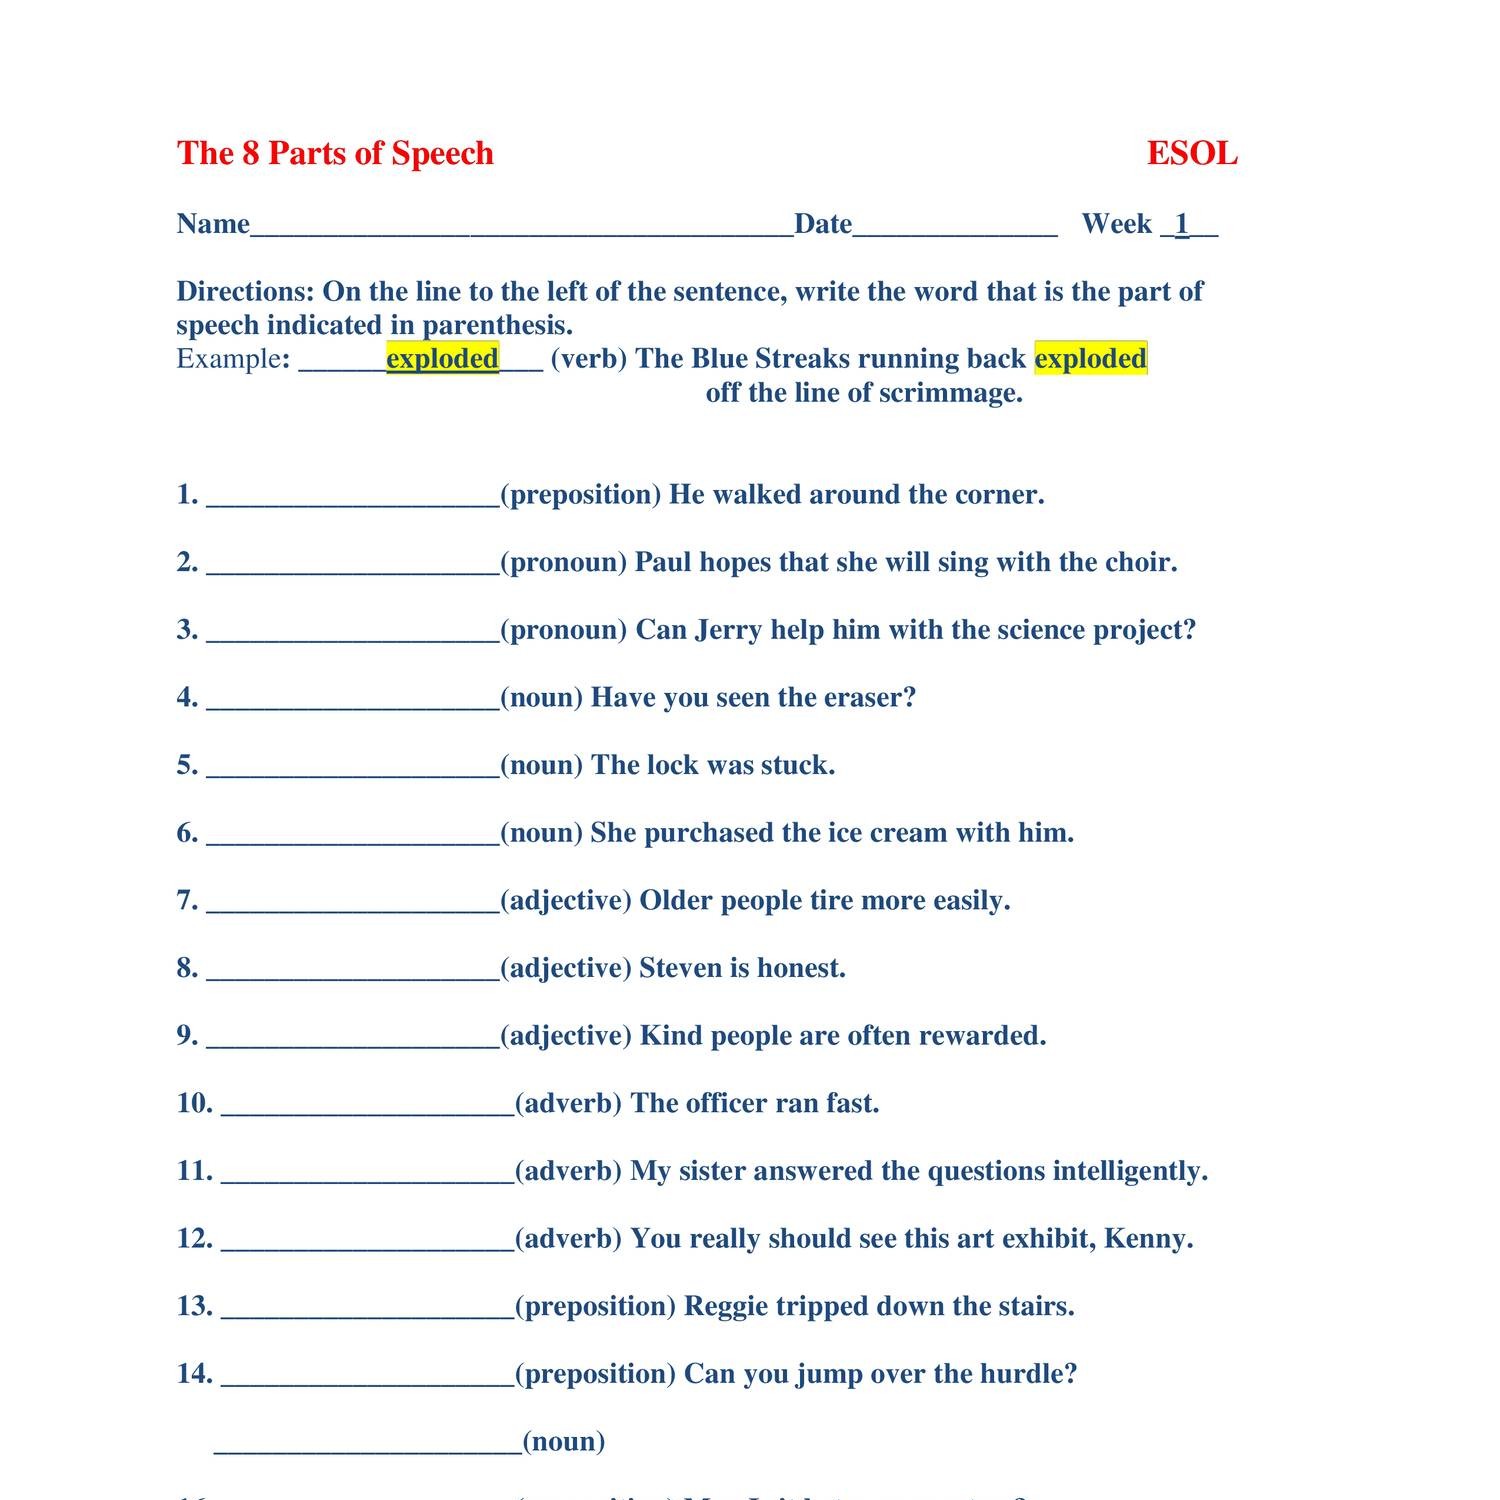 week-1-the-8-parts-of-speech-worksheet-docx-docdroid